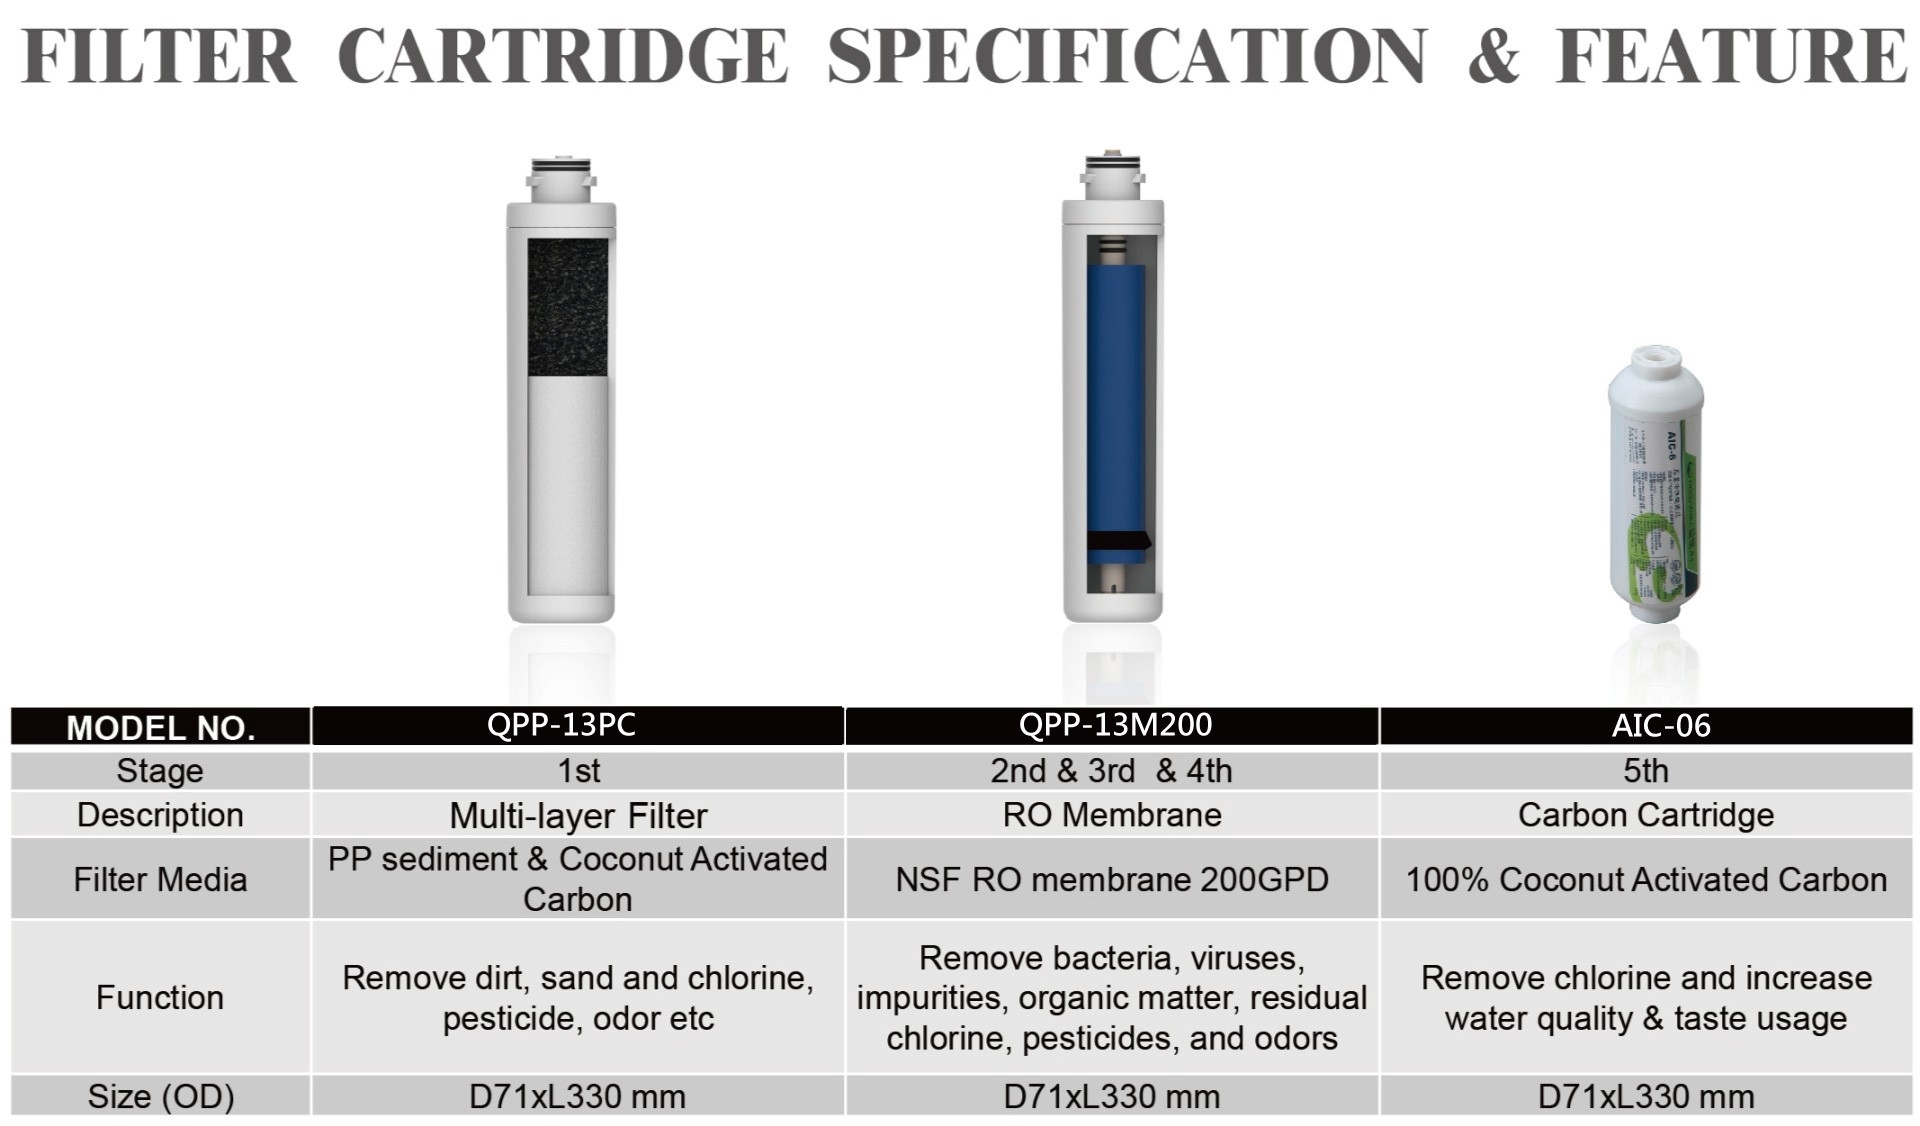 FILTER CARTRIDGE SPECIFICATION & FEATURE